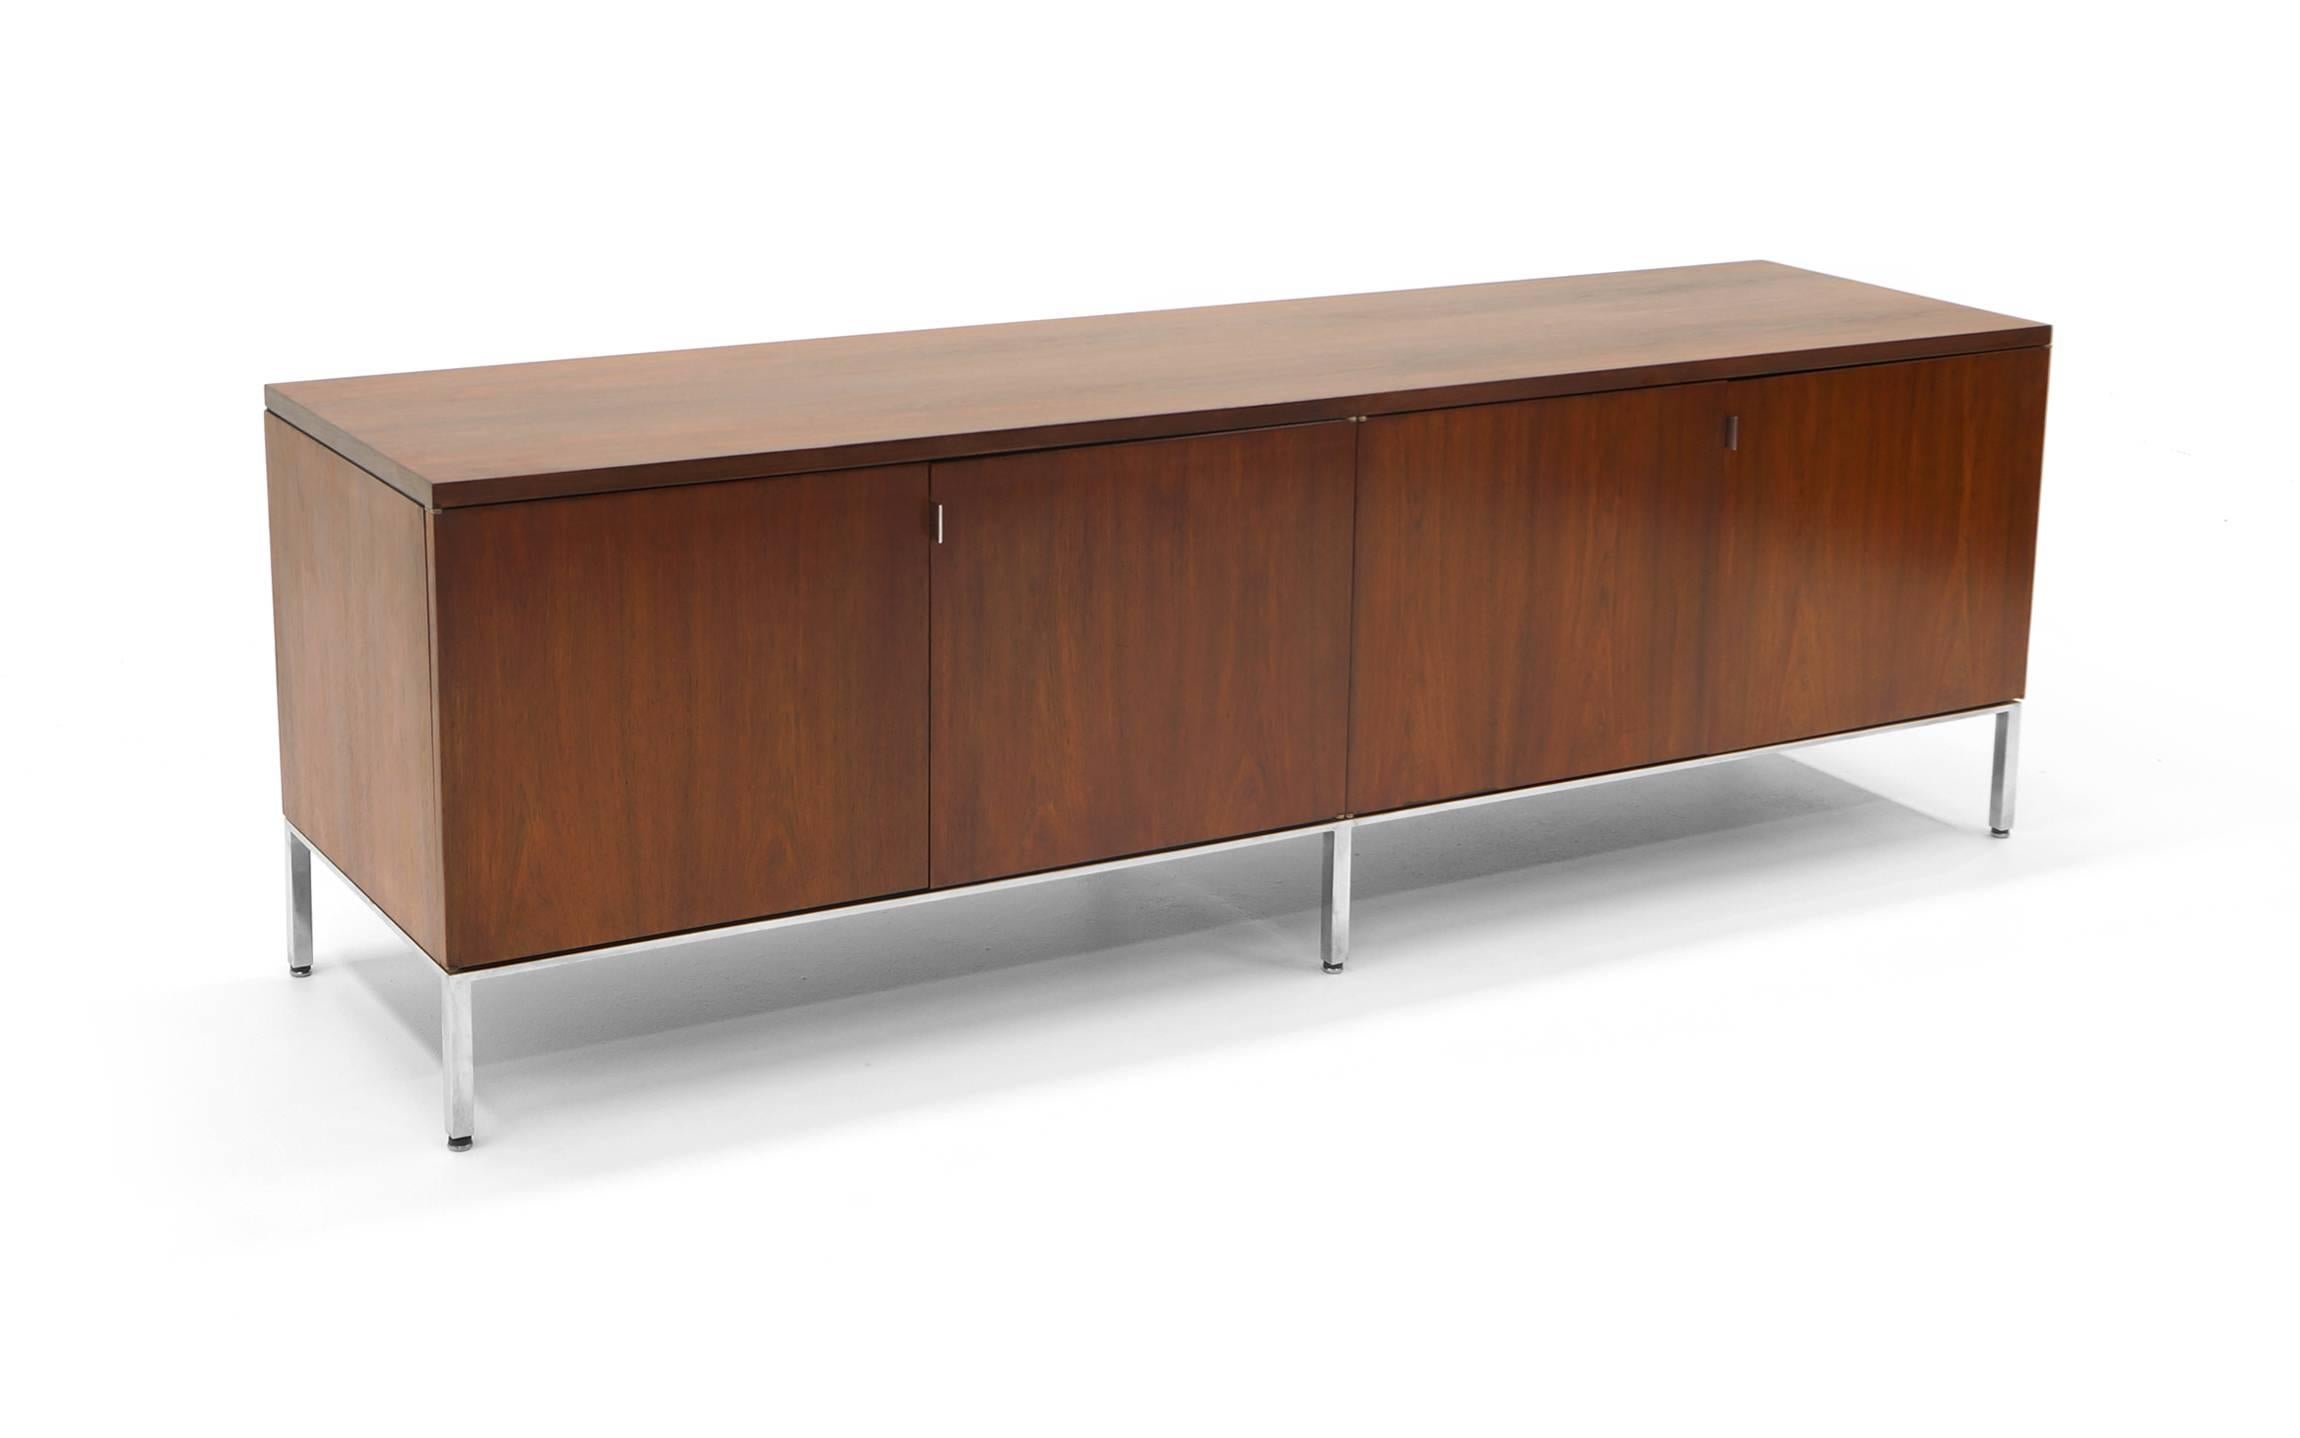 Florence Knoll for Knoll Brazilian Rosewood Credenza with polished chrome frame. Four doors reveal
 four sections with adjustable shelves making this great for general storage and perfect as a media cabinet and/or TV stand.